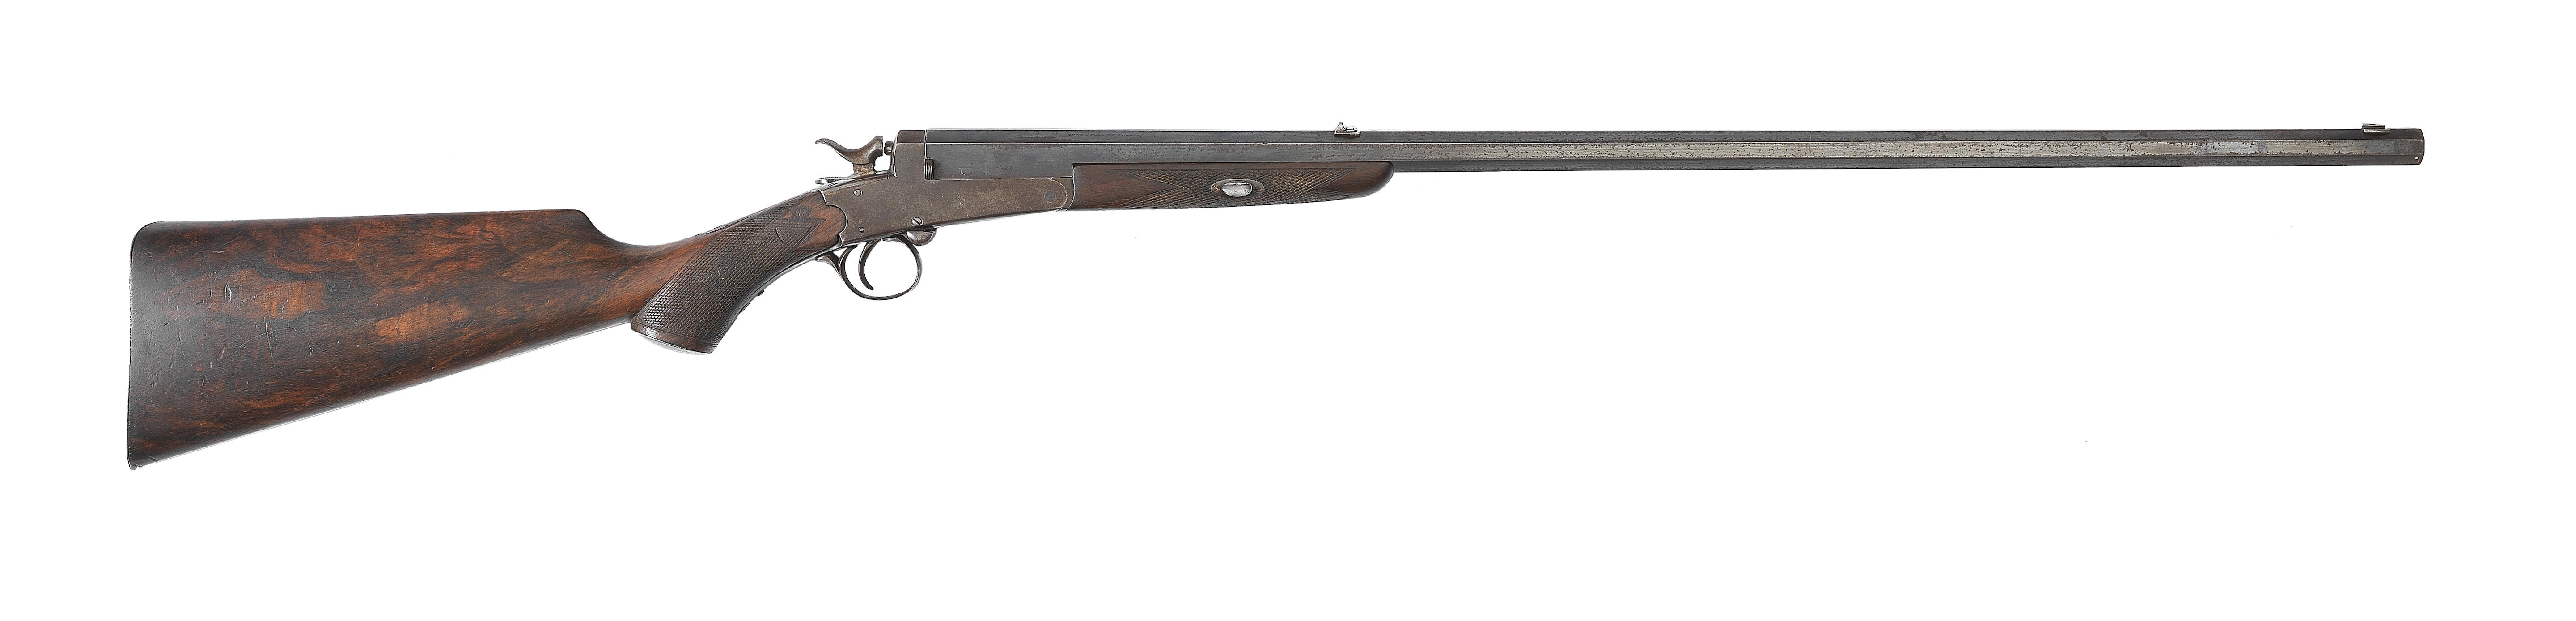 A .380 hammer rook-rifle by Holland & Holland, no. 25343/6666